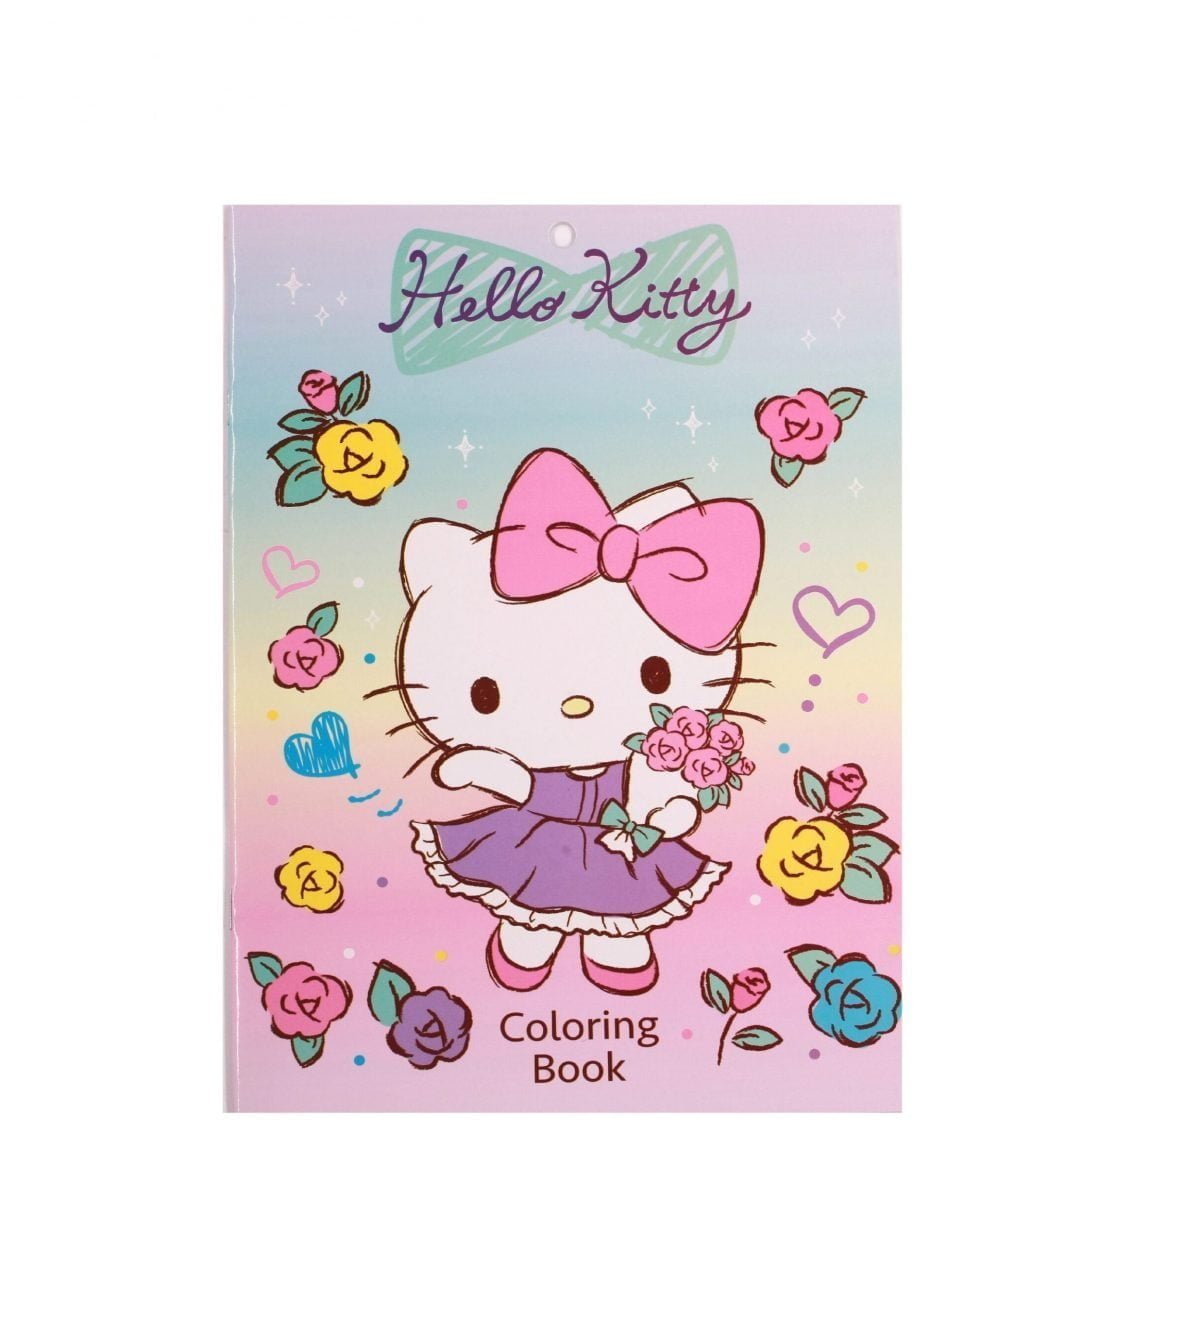 01F9Eae0842A3A Scaled Hello Kitty &Amp;Lt;Ul&Amp;Gt; &Amp;Lt;Li&Amp;Gt;Features Fun Pages For Coloring Activity&Amp;Lt;/Li&Amp;Gt; &Amp;Lt;Li&Amp;Gt;Improves Motor Skills And Hand-Eye Coordination&Amp;Lt;/Li&Amp;Gt; &Amp;Lt;Li&Amp;Gt;Encourages Color Awareness And Recognition&Amp;Lt;/Li&Amp;Gt; &Amp;Lt;Li&Amp;Gt;Ideal For Kids To Keep Them Busy And Entertained&Amp;Lt;/Li&Amp;Gt; &Amp;Lt;Li&Amp;Gt;Endless Hours Of Fun&Amp;Lt;/Li&Amp;Gt; &Amp;Lt;/Ul&Amp;Gt; Hello Kitty Coloring Book Hello Kitty Coloring Book With Hello Kitty Stickers (Hk673) 16 Sheets